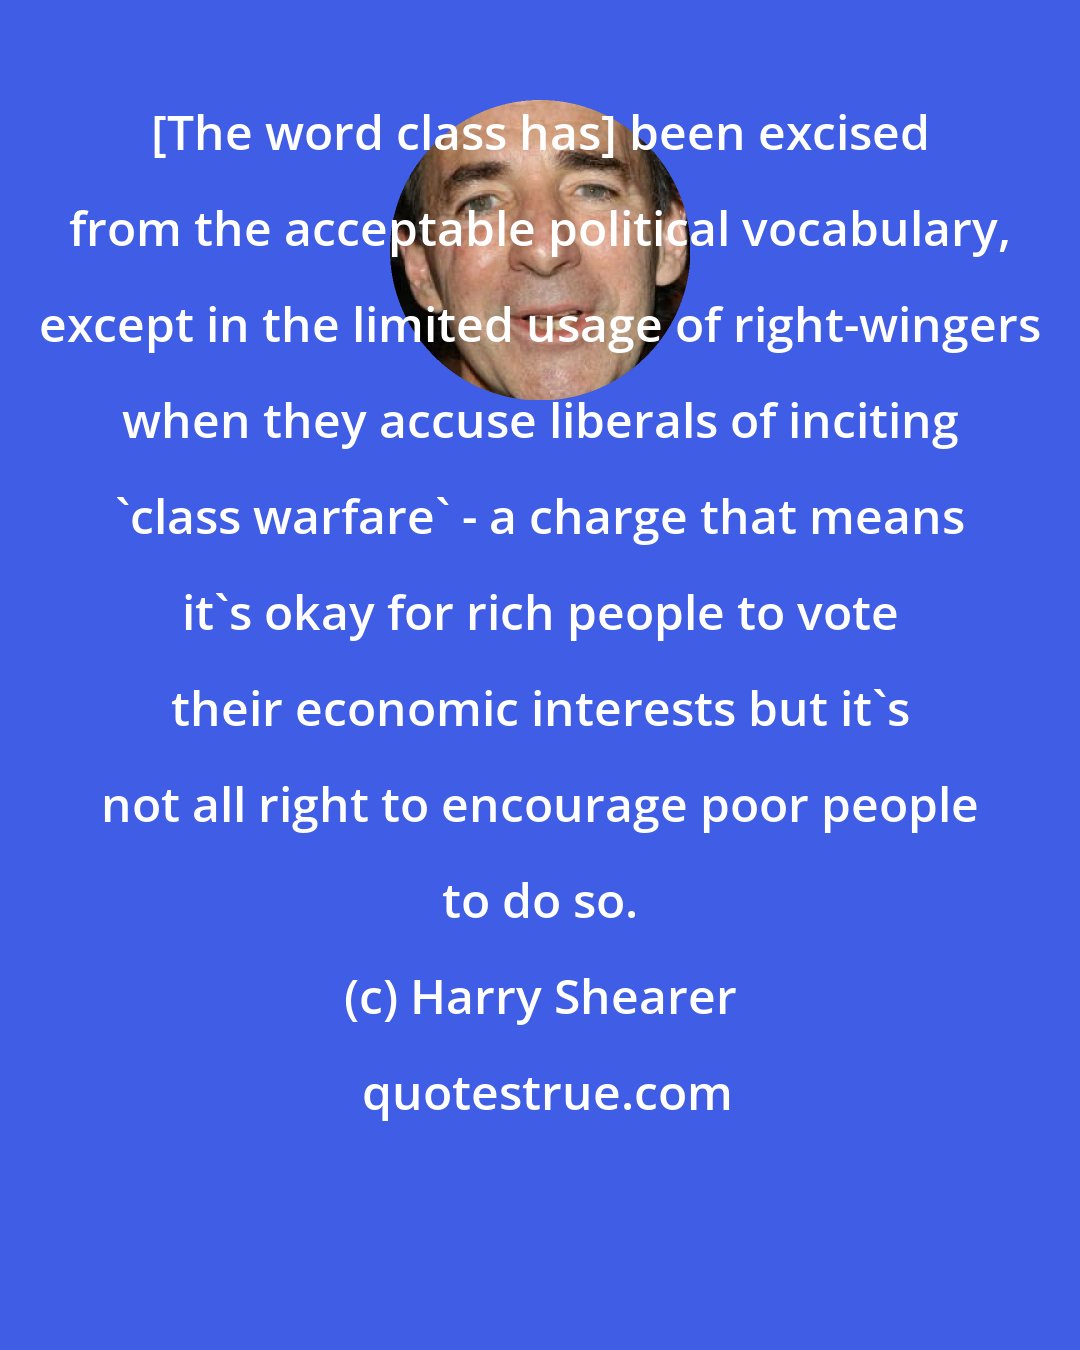 Harry Shearer: [The word class has] been excised from the acceptable political vocabulary, except in the limited usage of right-wingers when they accuse liberals of inciting 'class warfare' - a charge that means it's okay for rich people to vote their economic interests but it's not all right to encourage poor people to do so.